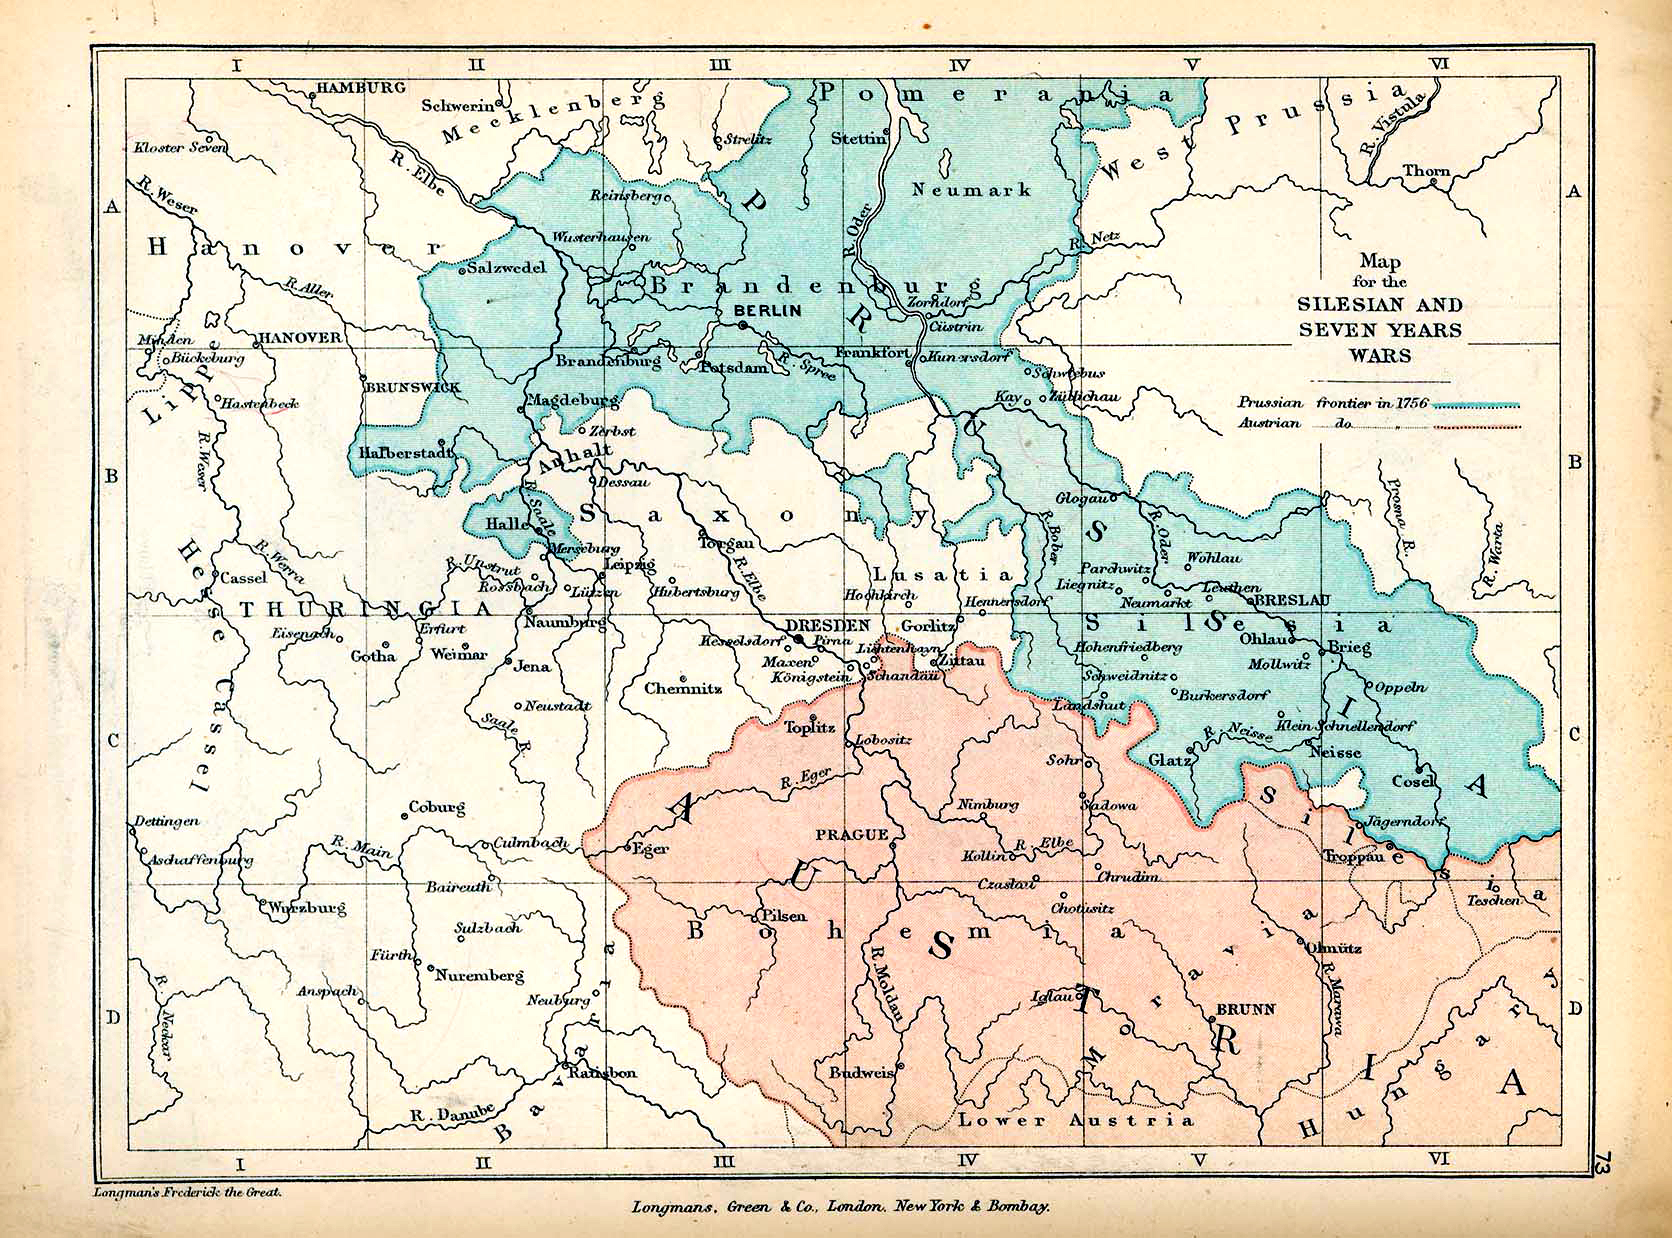 map-of-the-silesian-wars-and-the-seven-years-war-1740-1763